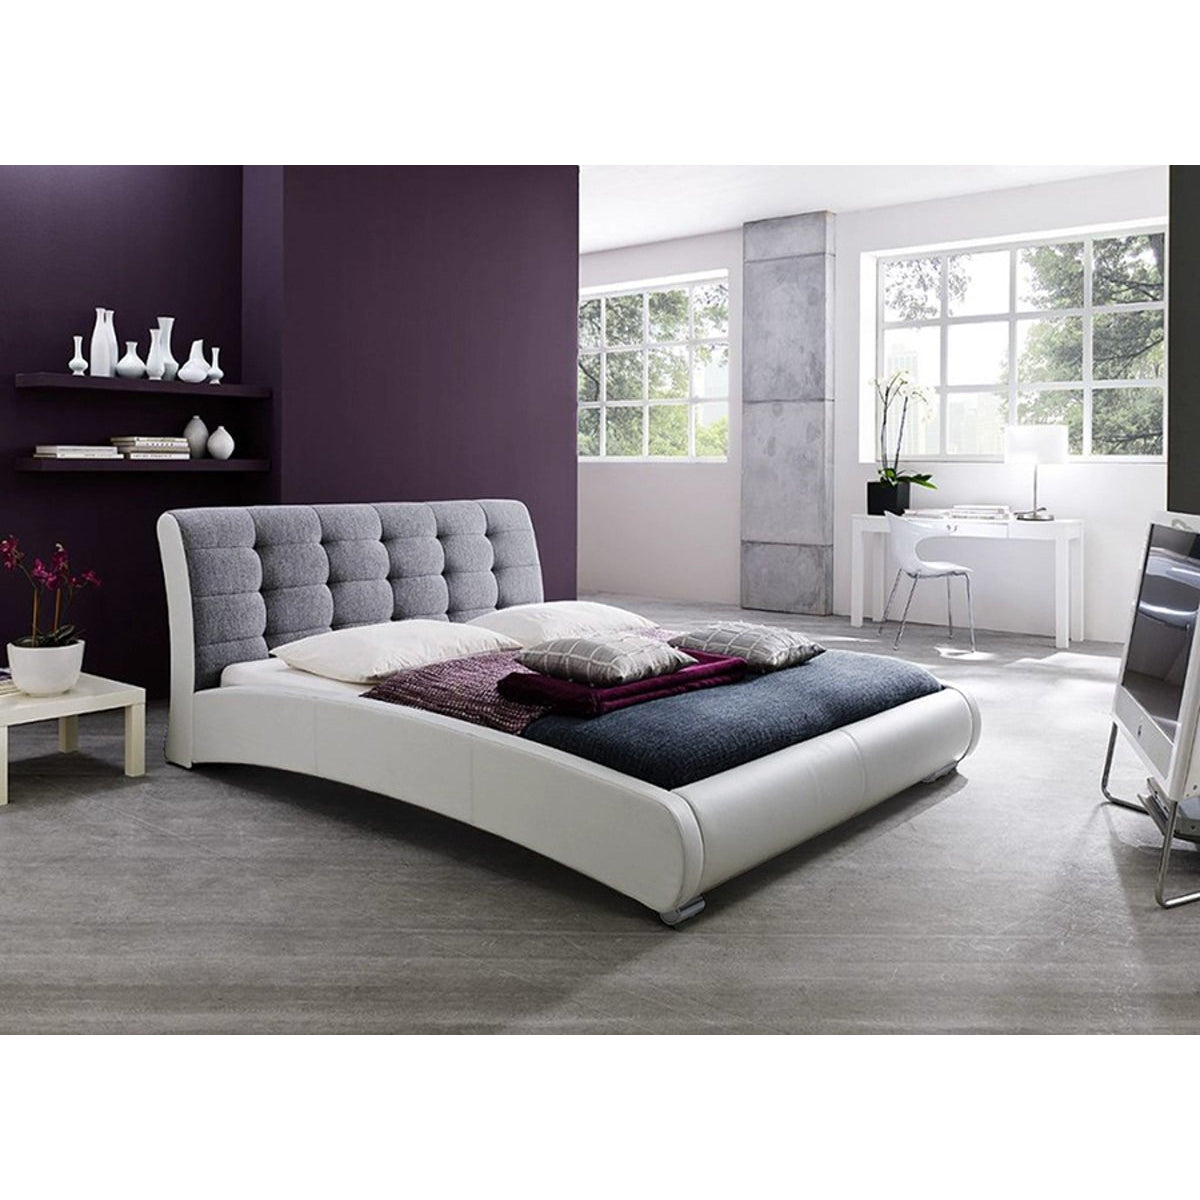 Baxton Studio Guerin Contemporary White Faux Leather Grey Fabric Two Tone Upholstered Grid Tufted Queen-Size Platform Bed Baxton Studio-Queen Headboard-Minimal And Modern - 4